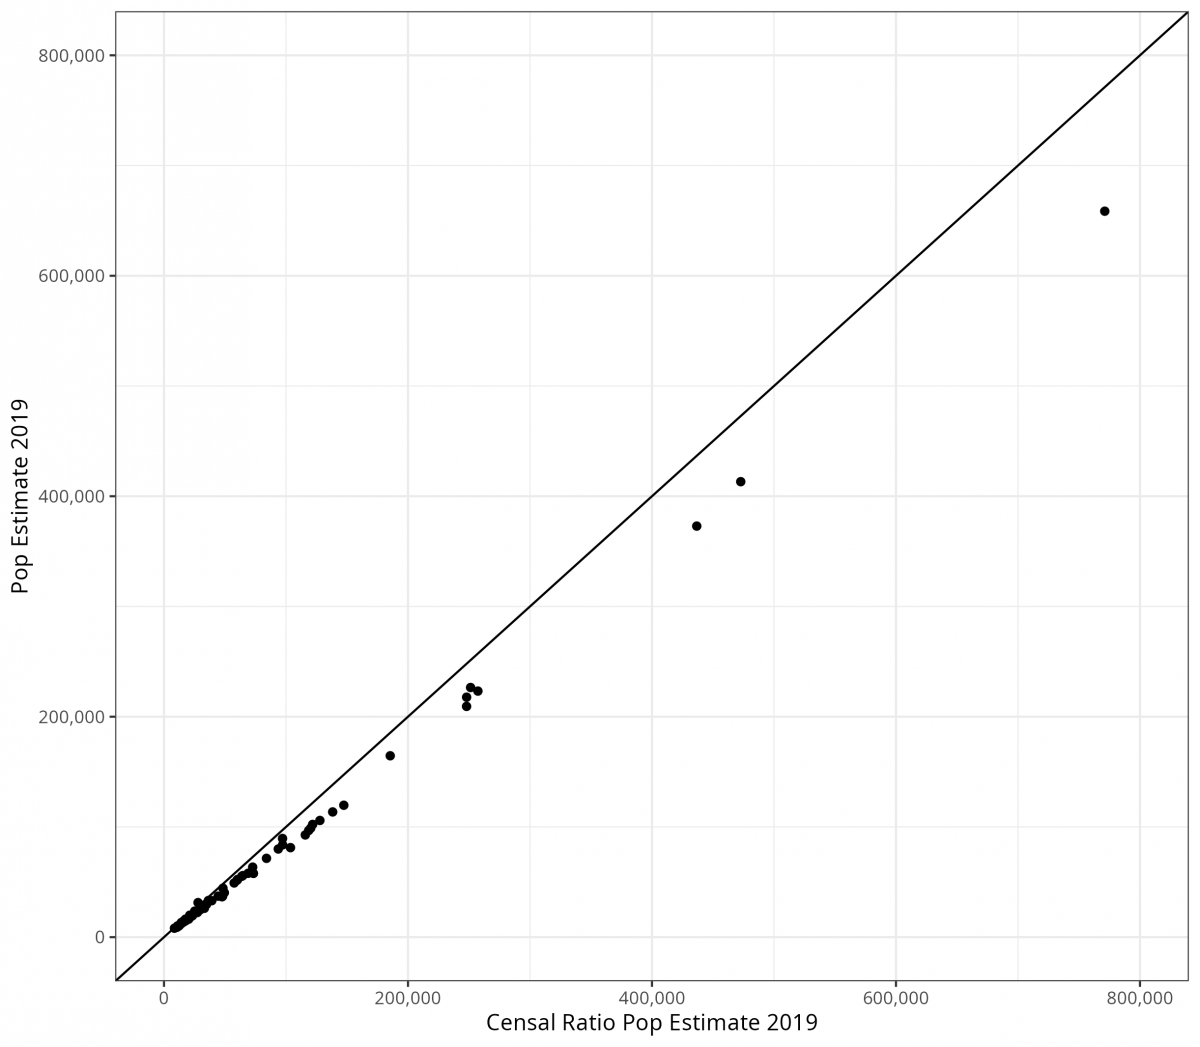 Figure 2: Figure 2 shows a graph depicting the correlation between the Censal Ratio Population estimate of 2019 (based on 2010 data) and the actual US Census Bureau’s 2019 population estimate of 2019. The x-axis shows a range of the 2019 censal ratio population estimate, ranging from 0 to 800,000. The y-axis shows a range of the 2019 population estimate and also ranges from 0 to 800,000. The graph demonstrates how the Censal Ratio Method produces a more closely accurate set of estimations than the symptomatic indicator alone. 